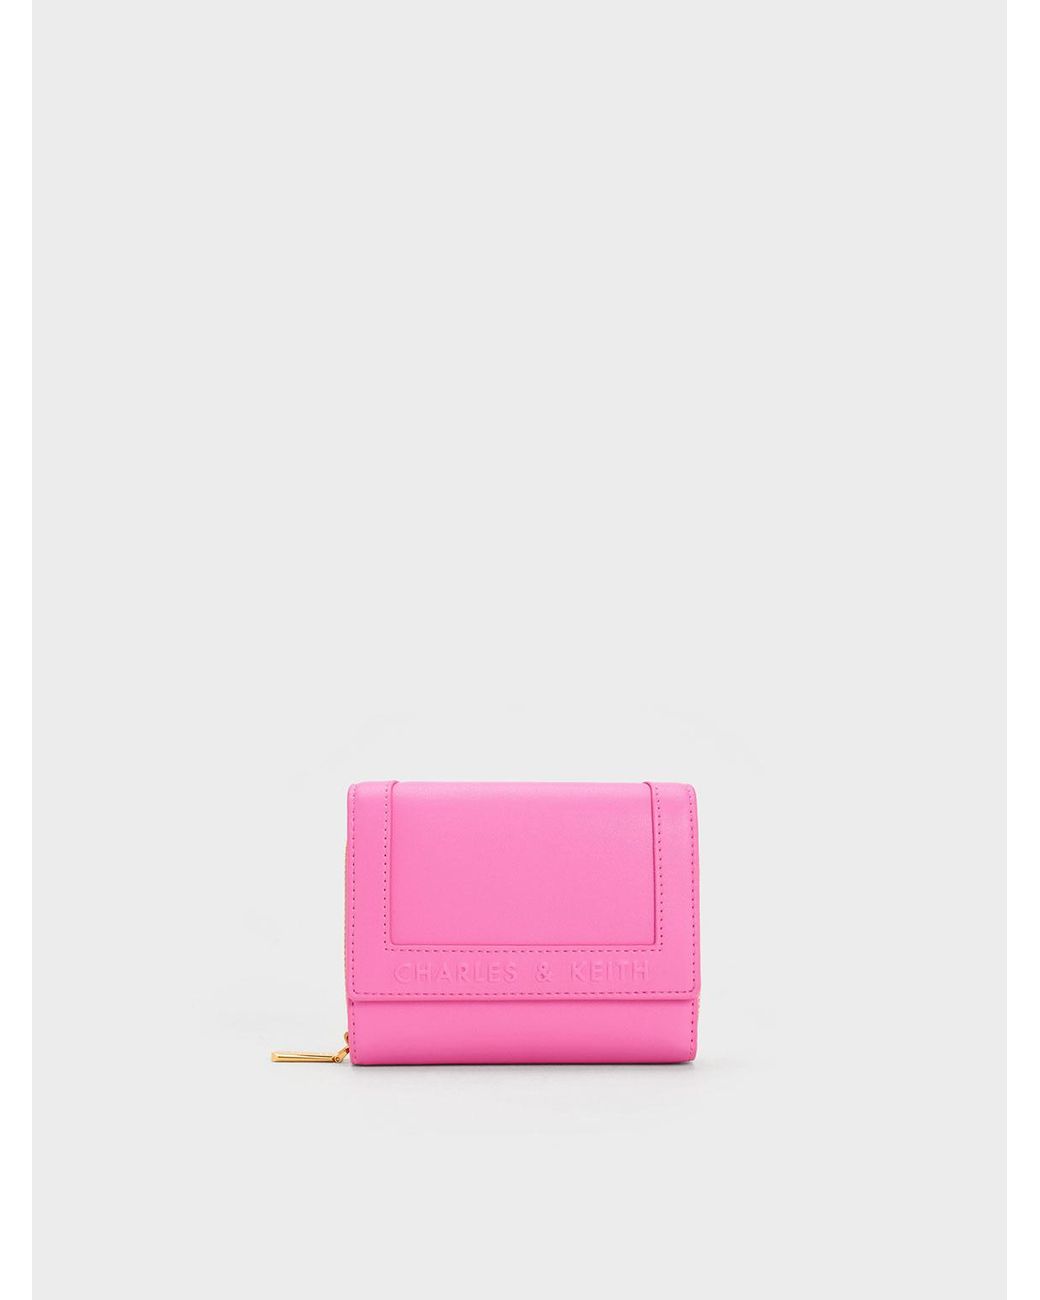 Charles & Keith Stitch-trim Front Flap Wallet in Pink | Lyst